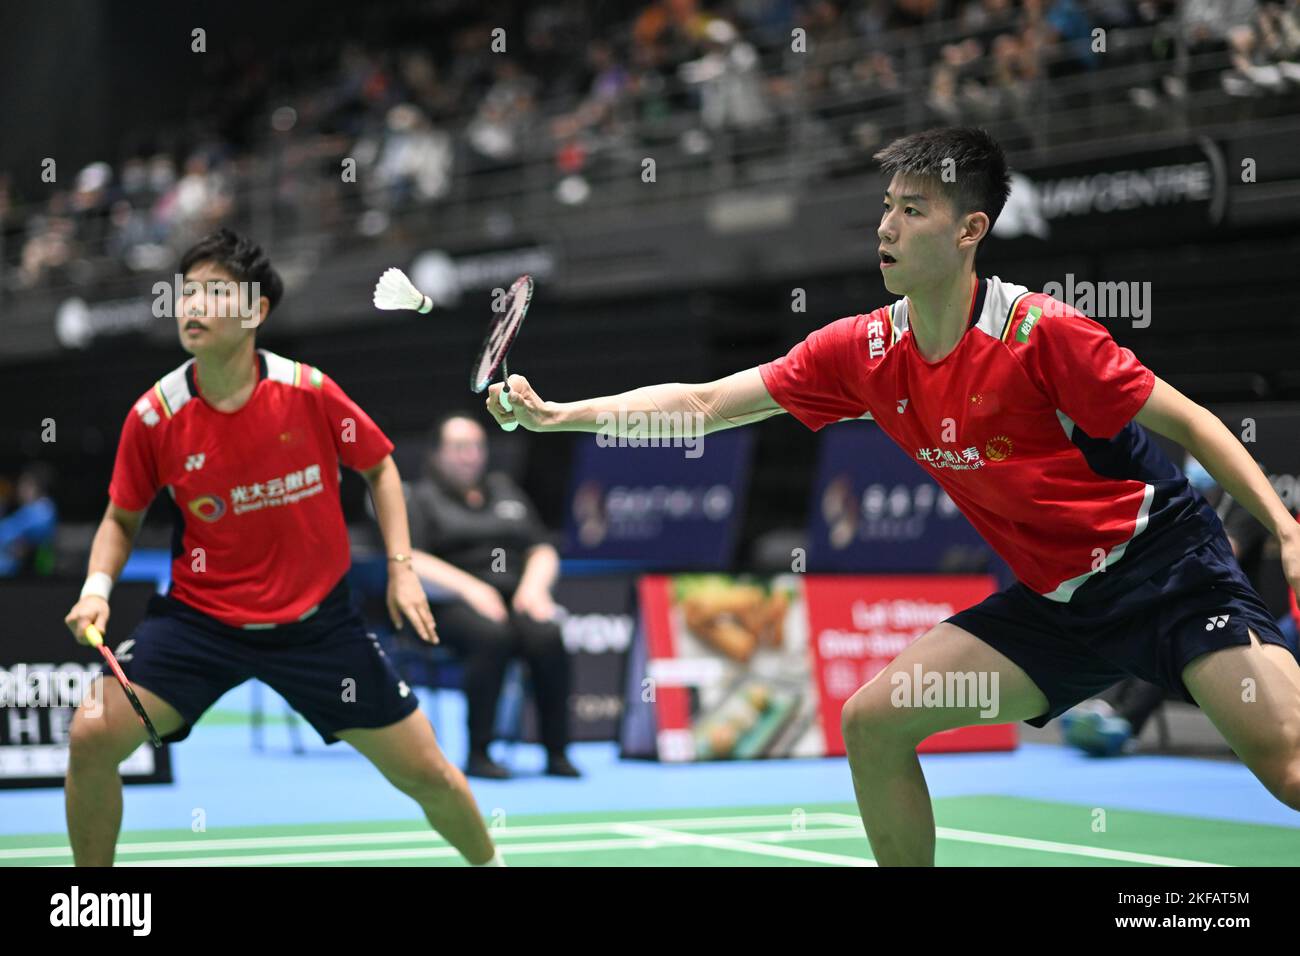 Sydney, Australia. 17th Nov, 2022. Huang Dong Ping (L) and Feng Yan Zhe (R) of China seen during the 2022 SATHIO GROUP Australian Badminton Open mixed double round of 16 match against Young Hyuk Kim and Lee Yu Lim of Korea. Feng and Huang won the match 12-21, 21-14, 21-15. Credit: SOPA Images Limited/Alamy Live News Stock Photo